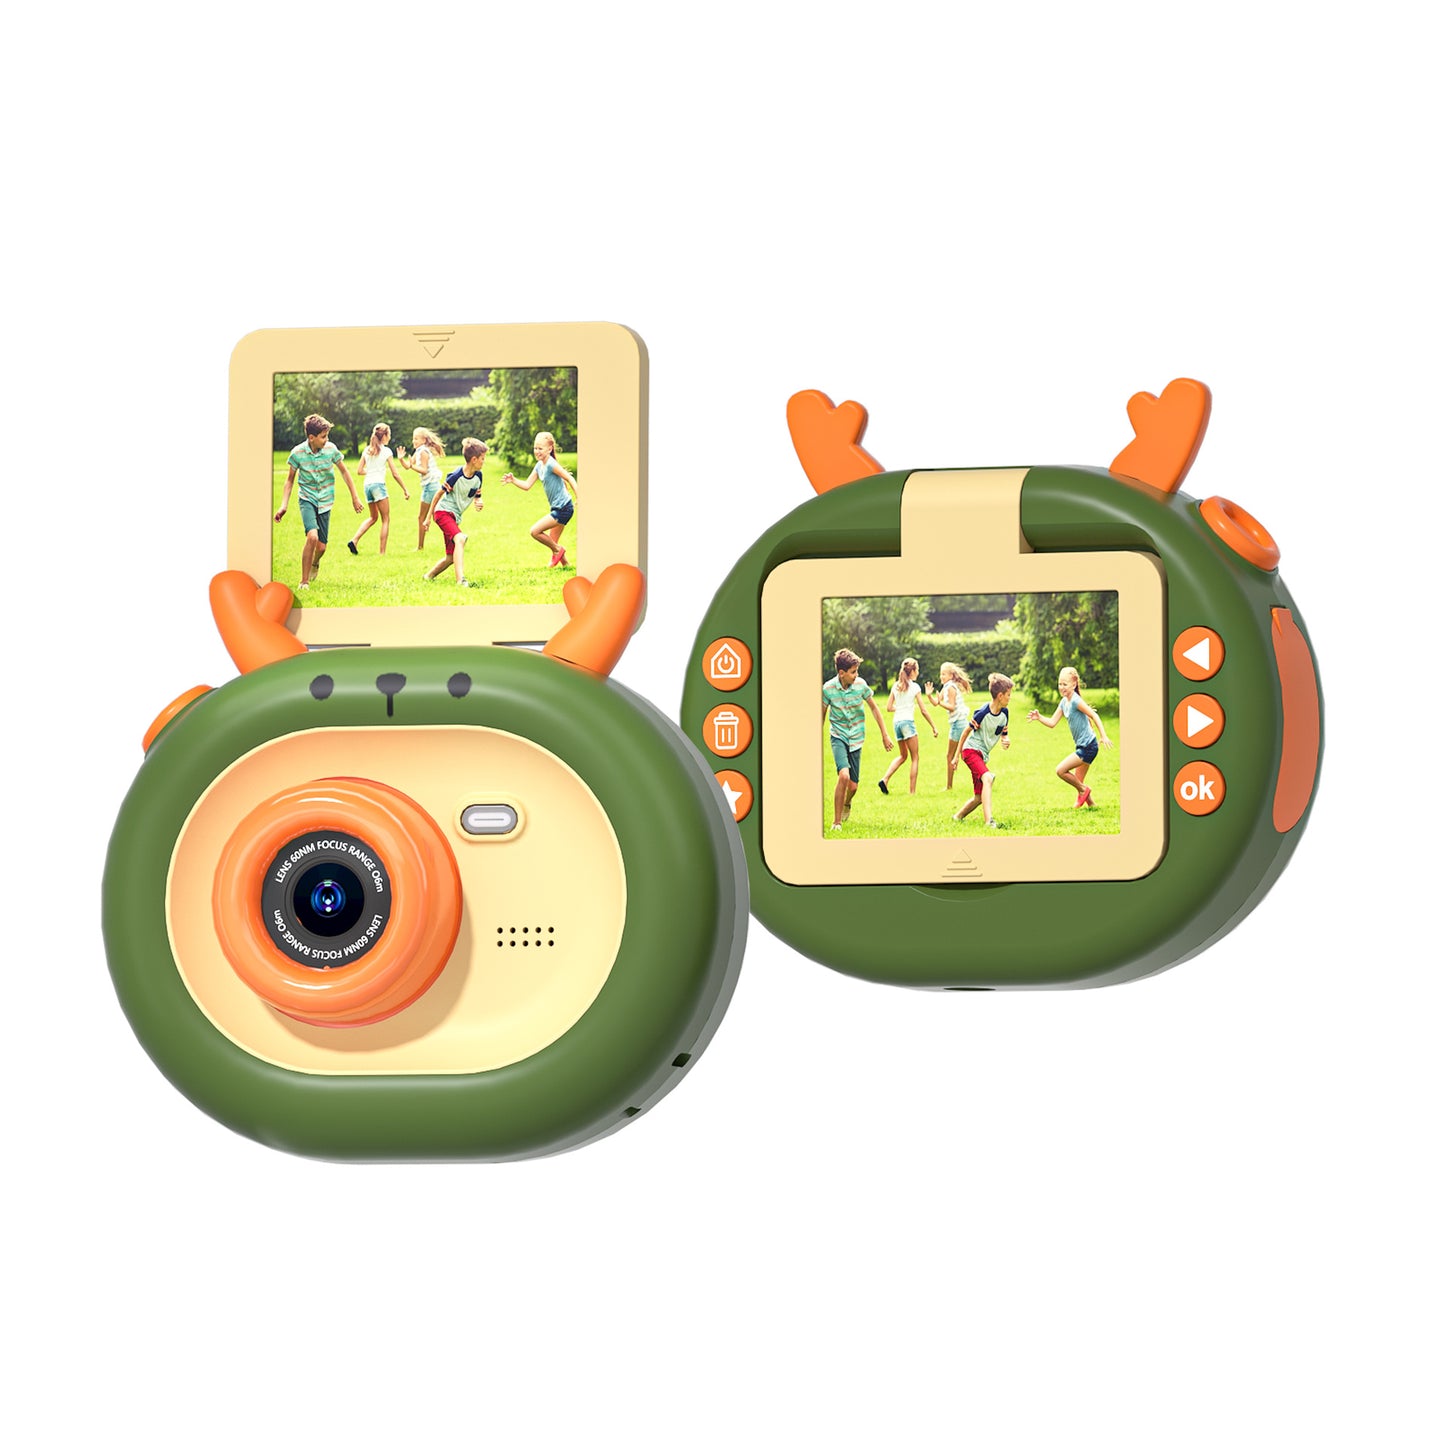 Flip Screen Camera for Kids - 180-Degree View for Unforgettable Memories